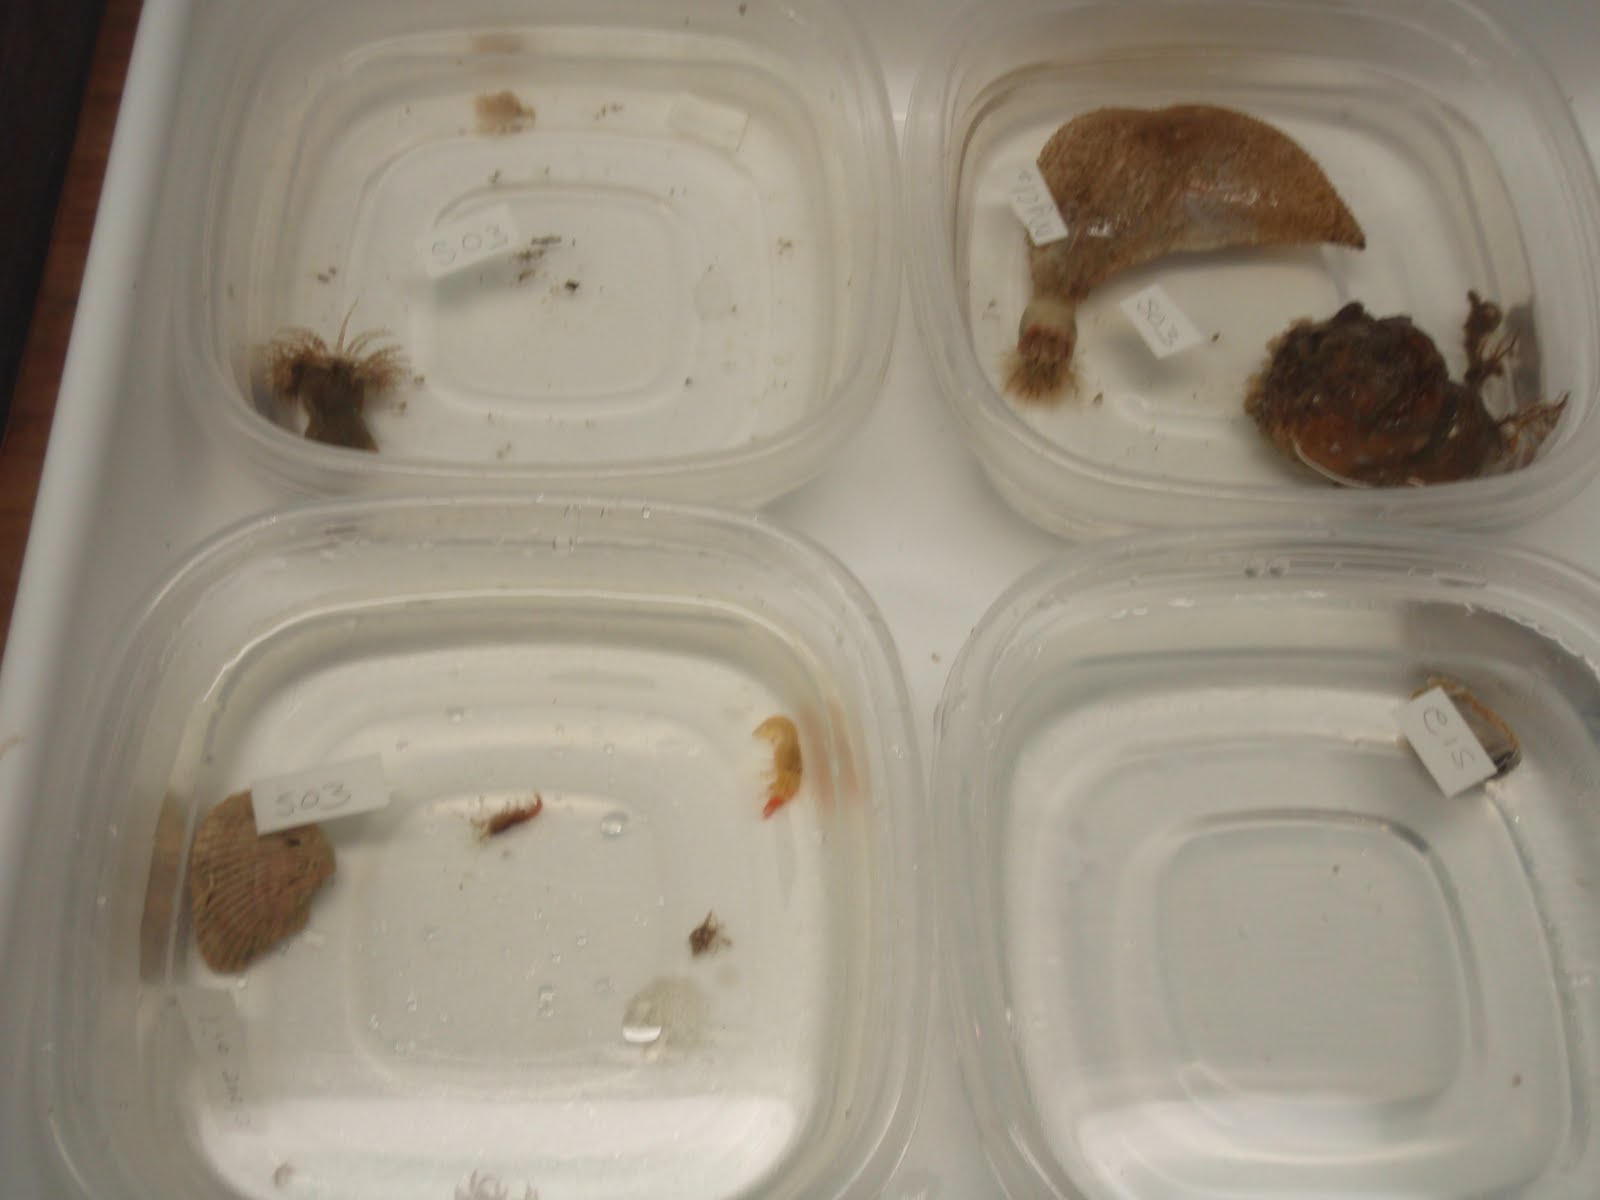 specimens laid out relaxing in tupperware containers